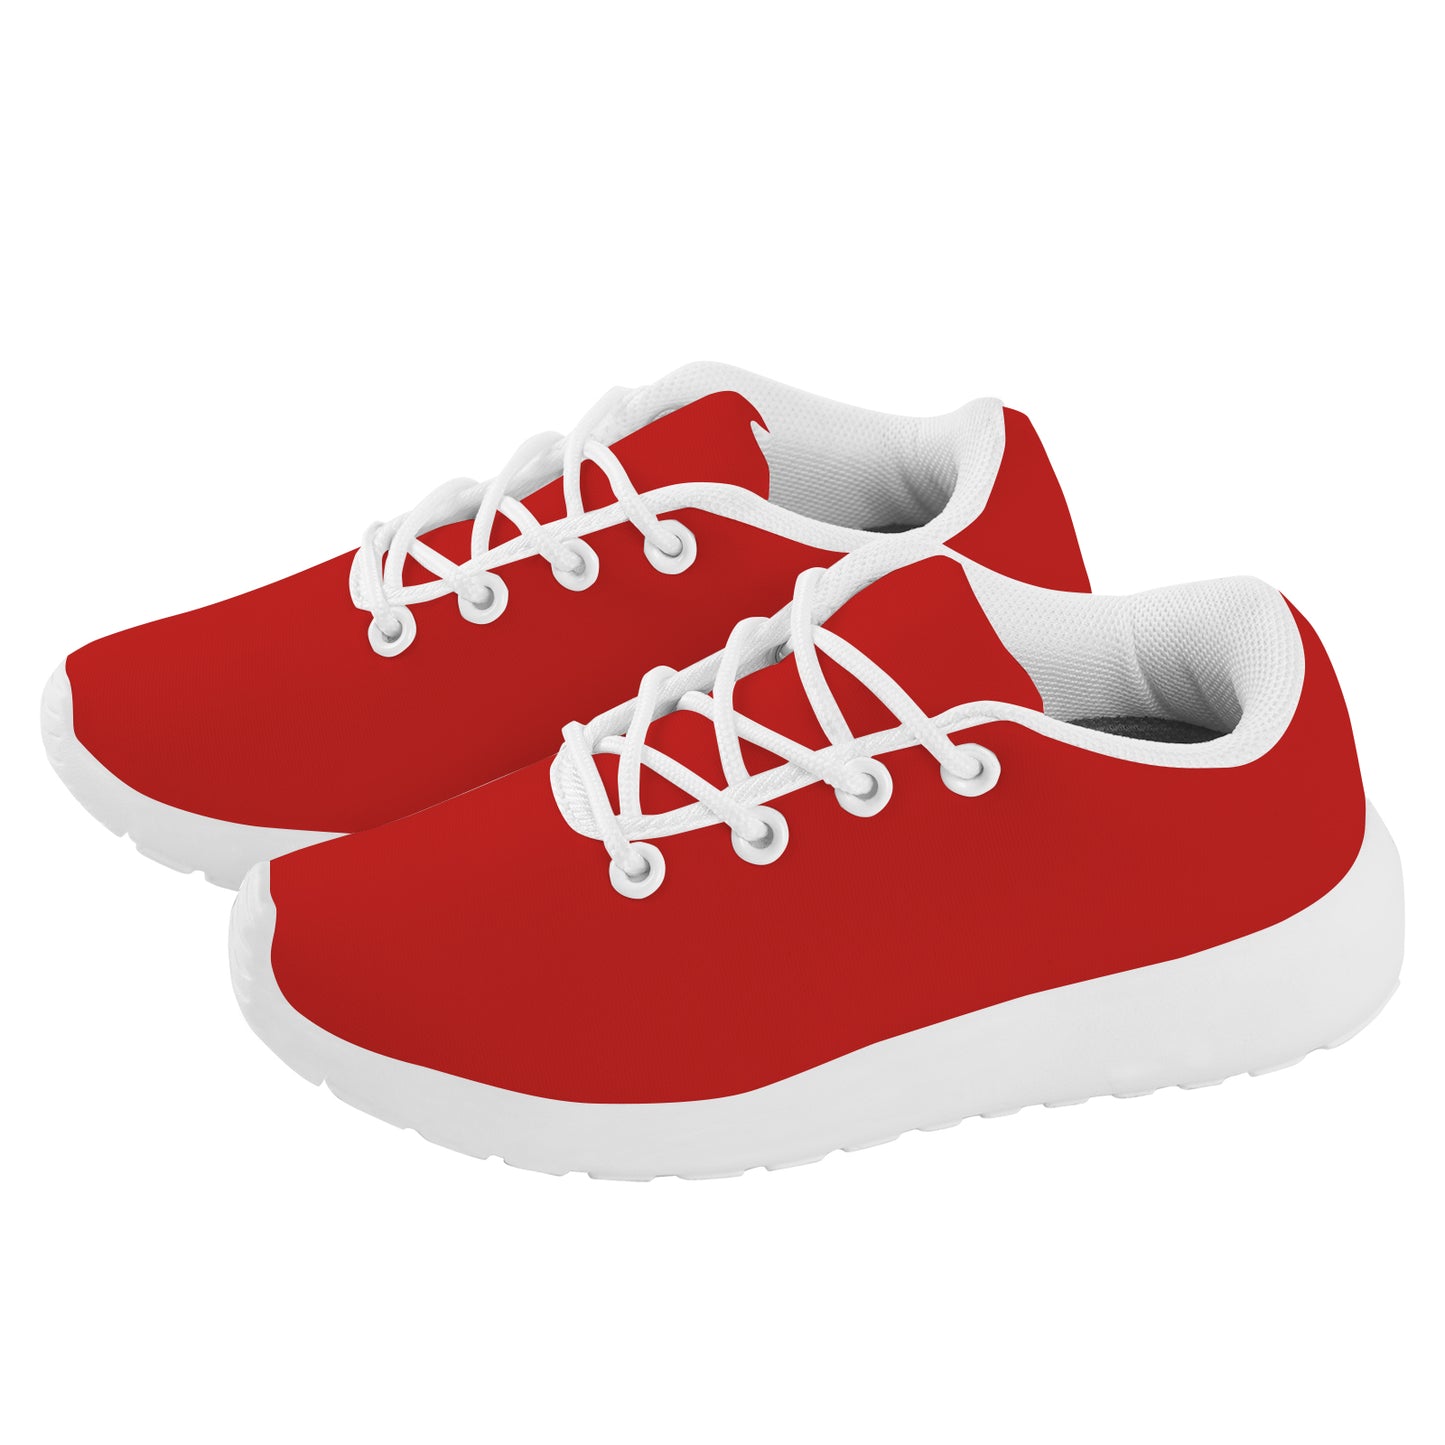 Kid's Sneakers - Classic Red